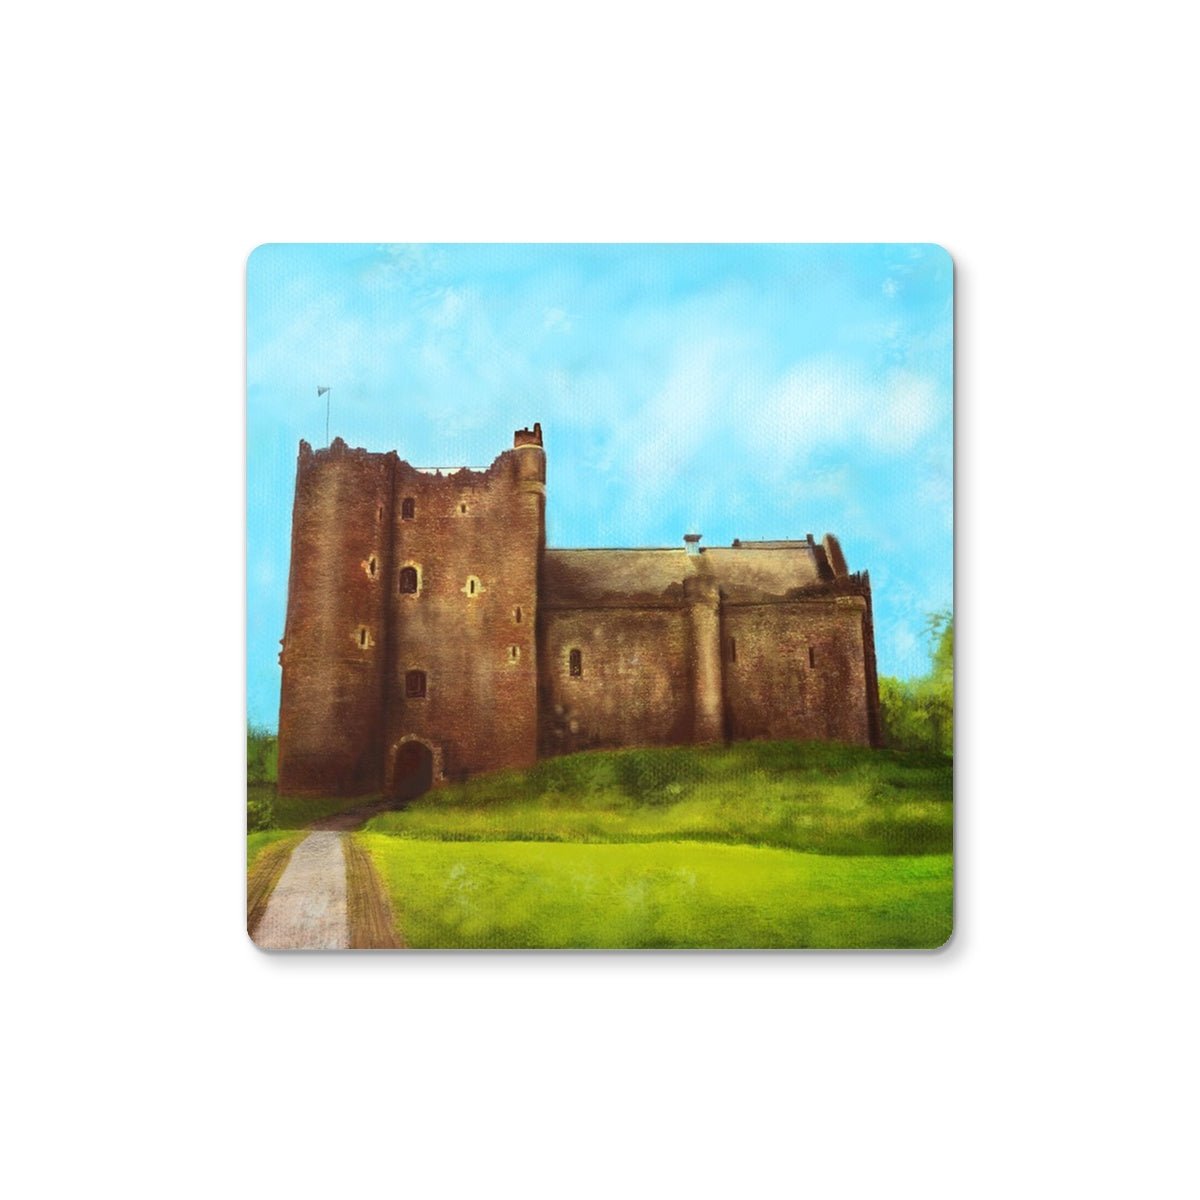 Doune Castle Art Gifts Coaster-Coasters-Scottish Castles Art Gallery-4 Coasters-Paintings, Prints, Homeware, Art Gifts From Scotland By Scottish Artist Kevin Hunter